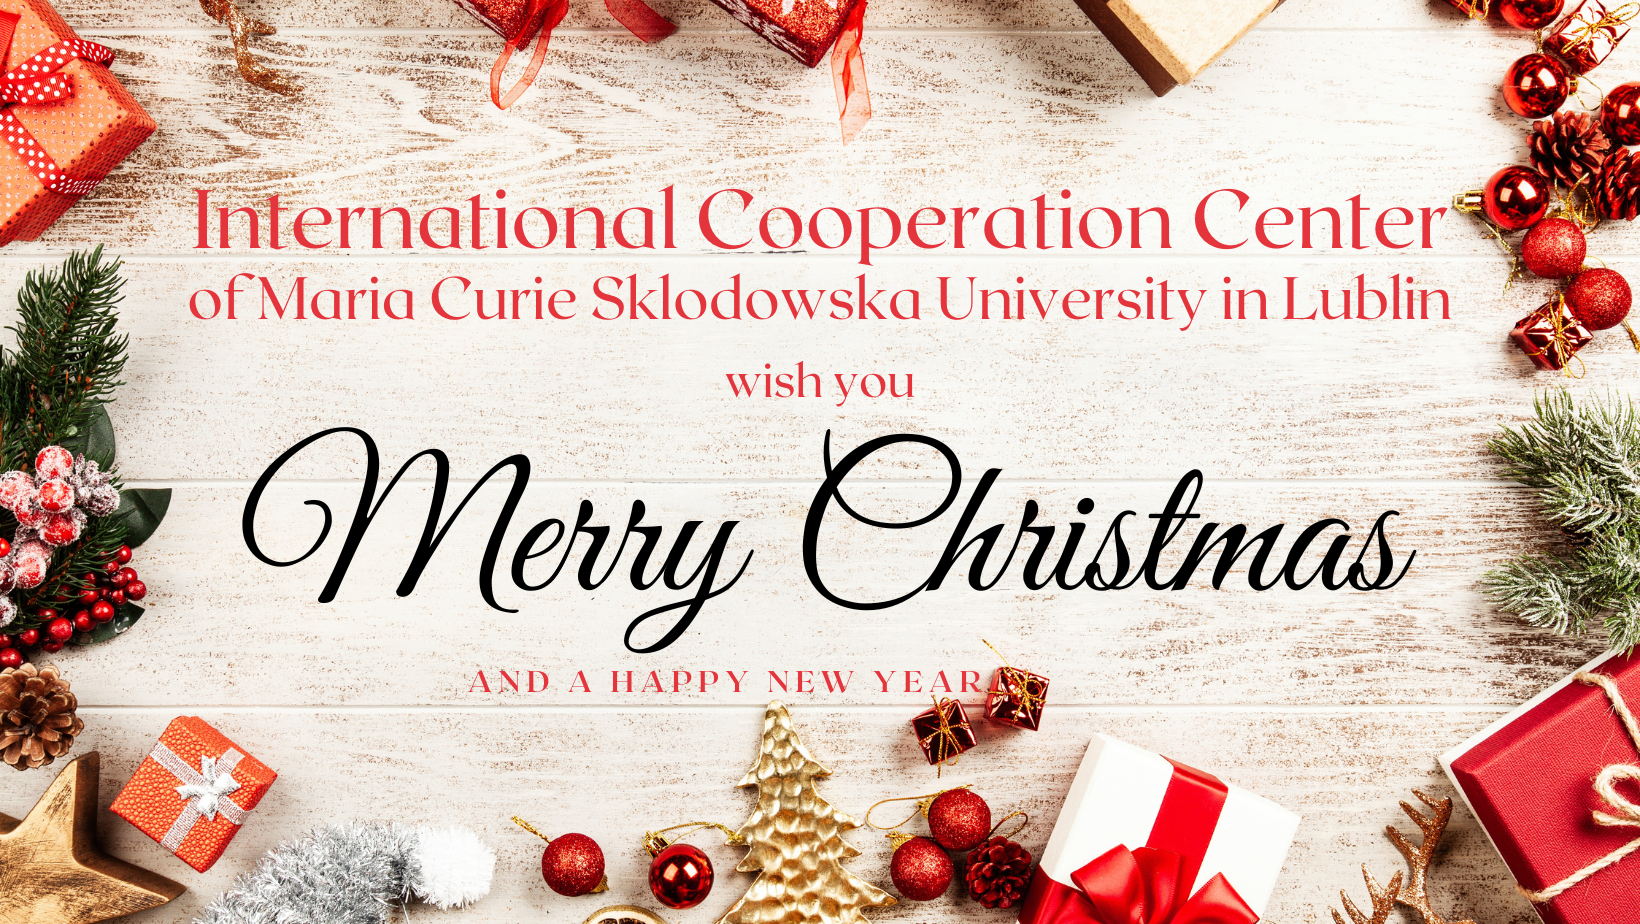 International Cooperation Center of Maria Curie Sklodowska University in Lublin.png